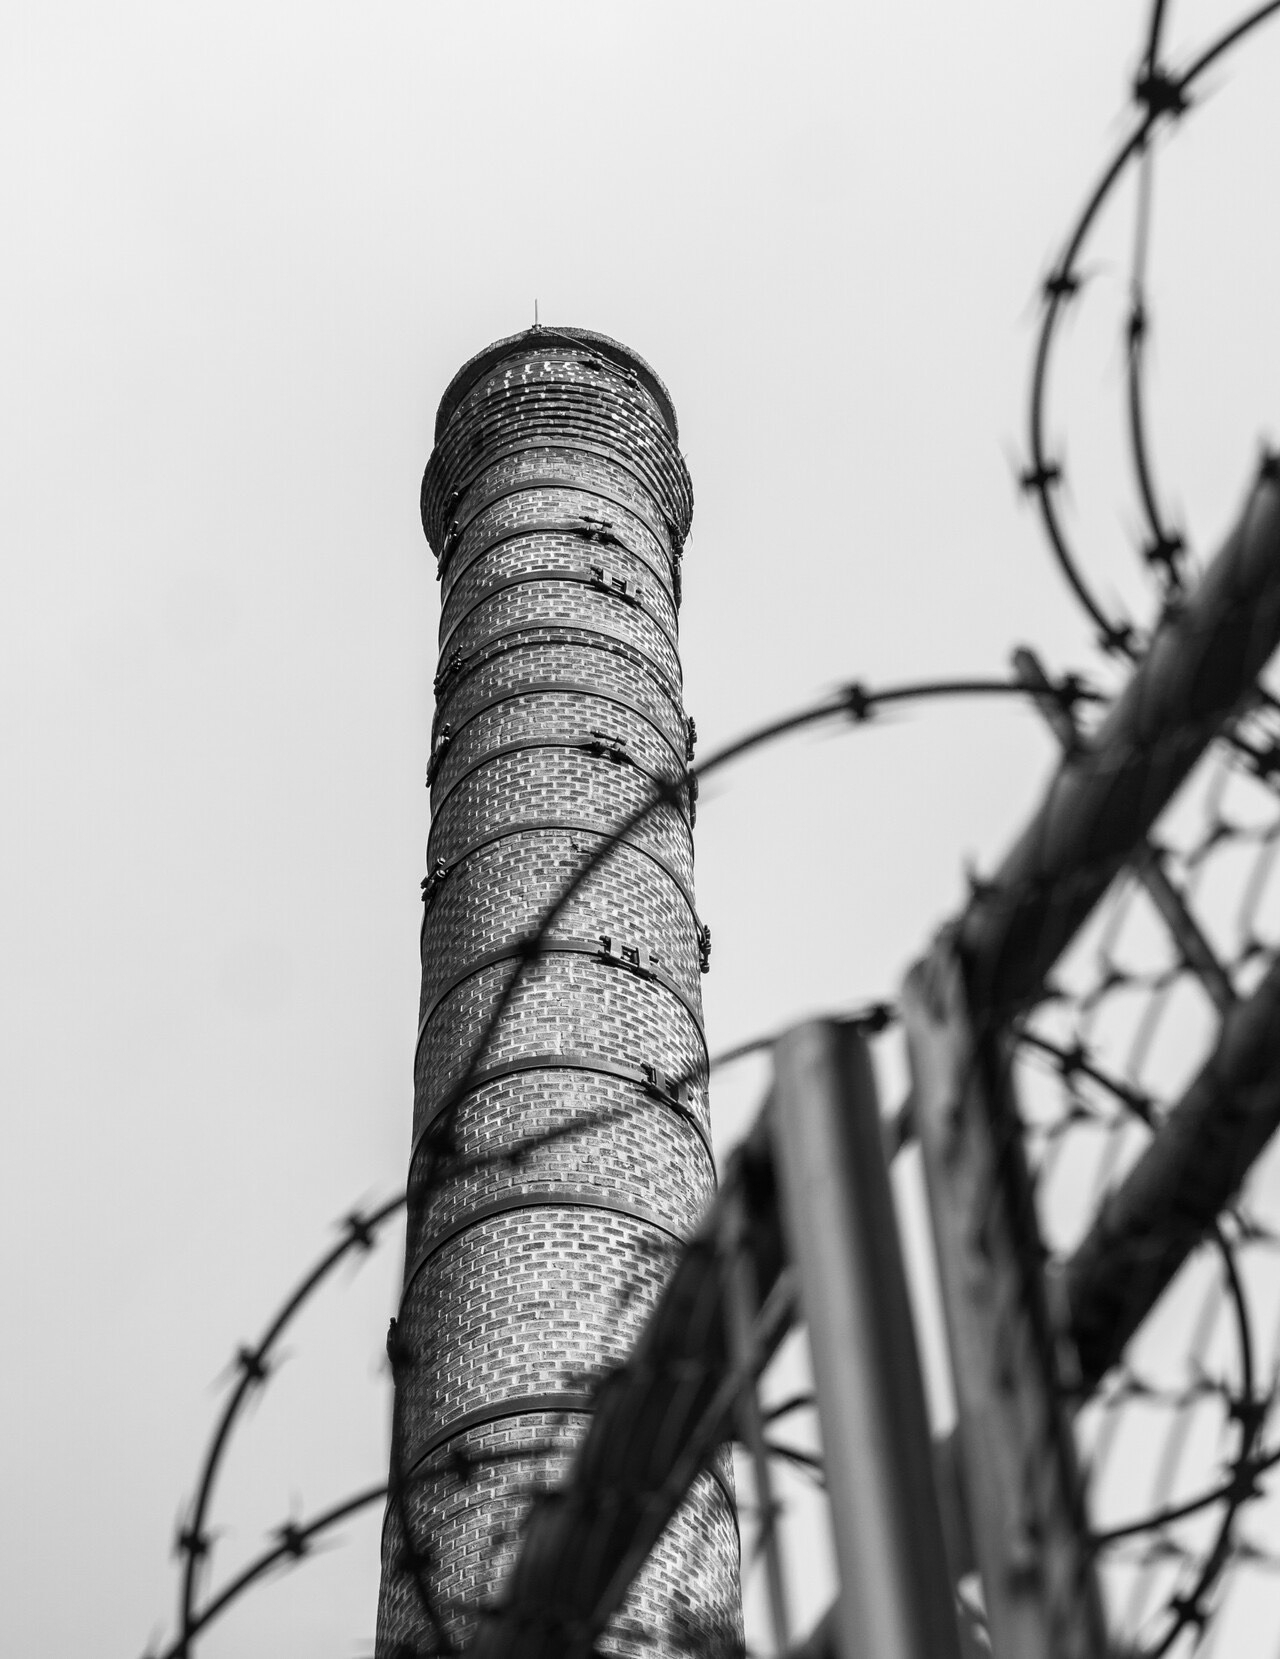 a black and white photo of smokestack behind barbed wire